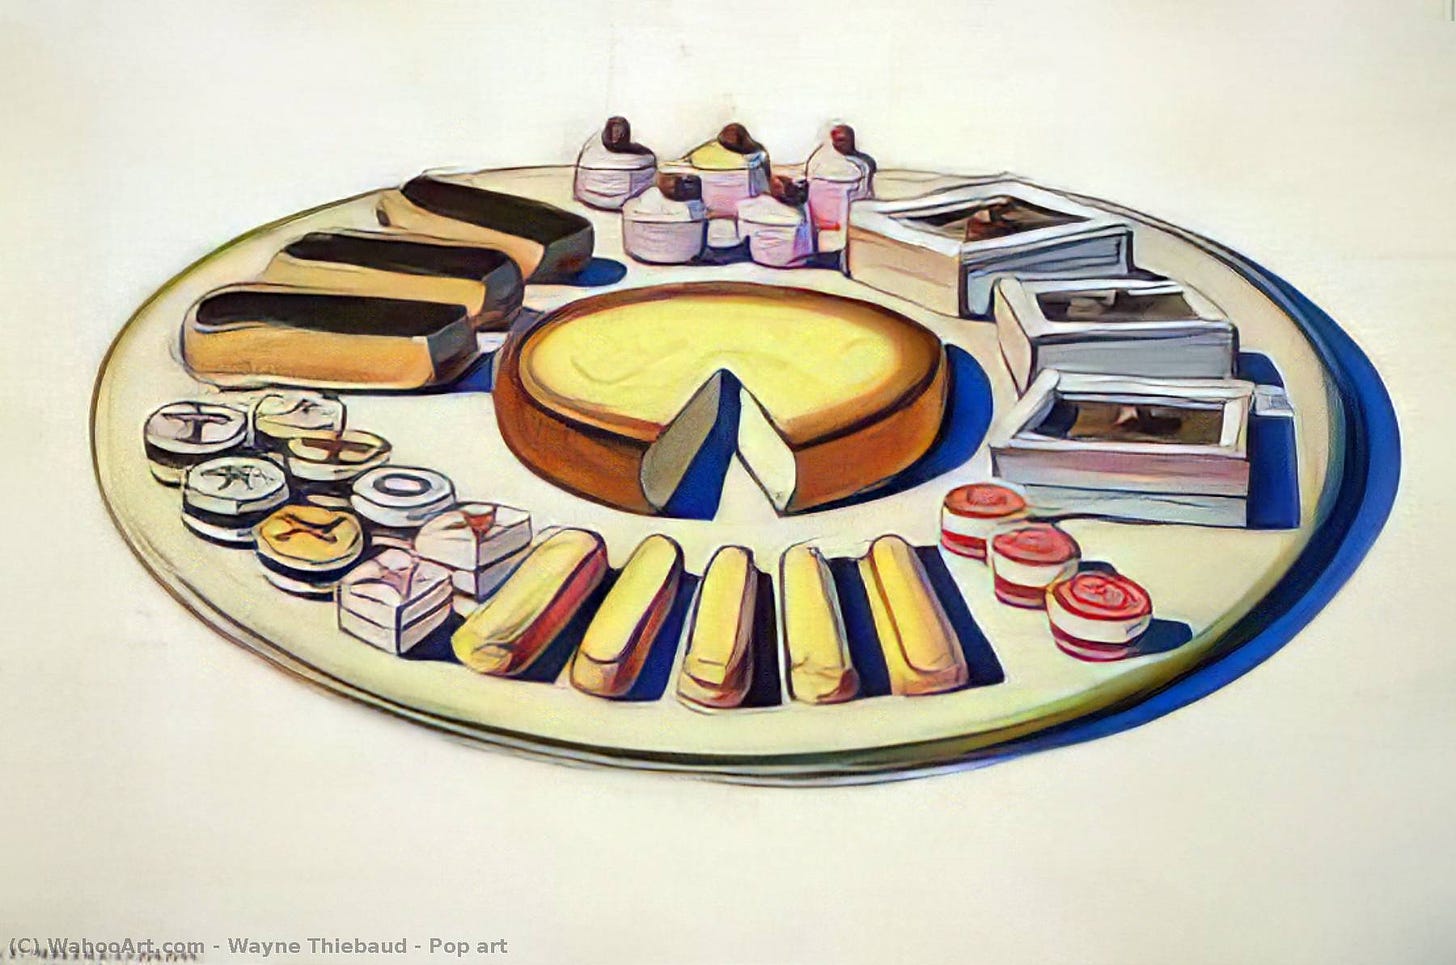 Pop art by Wayne Thiebaud | Most-Famous-Paintings.com